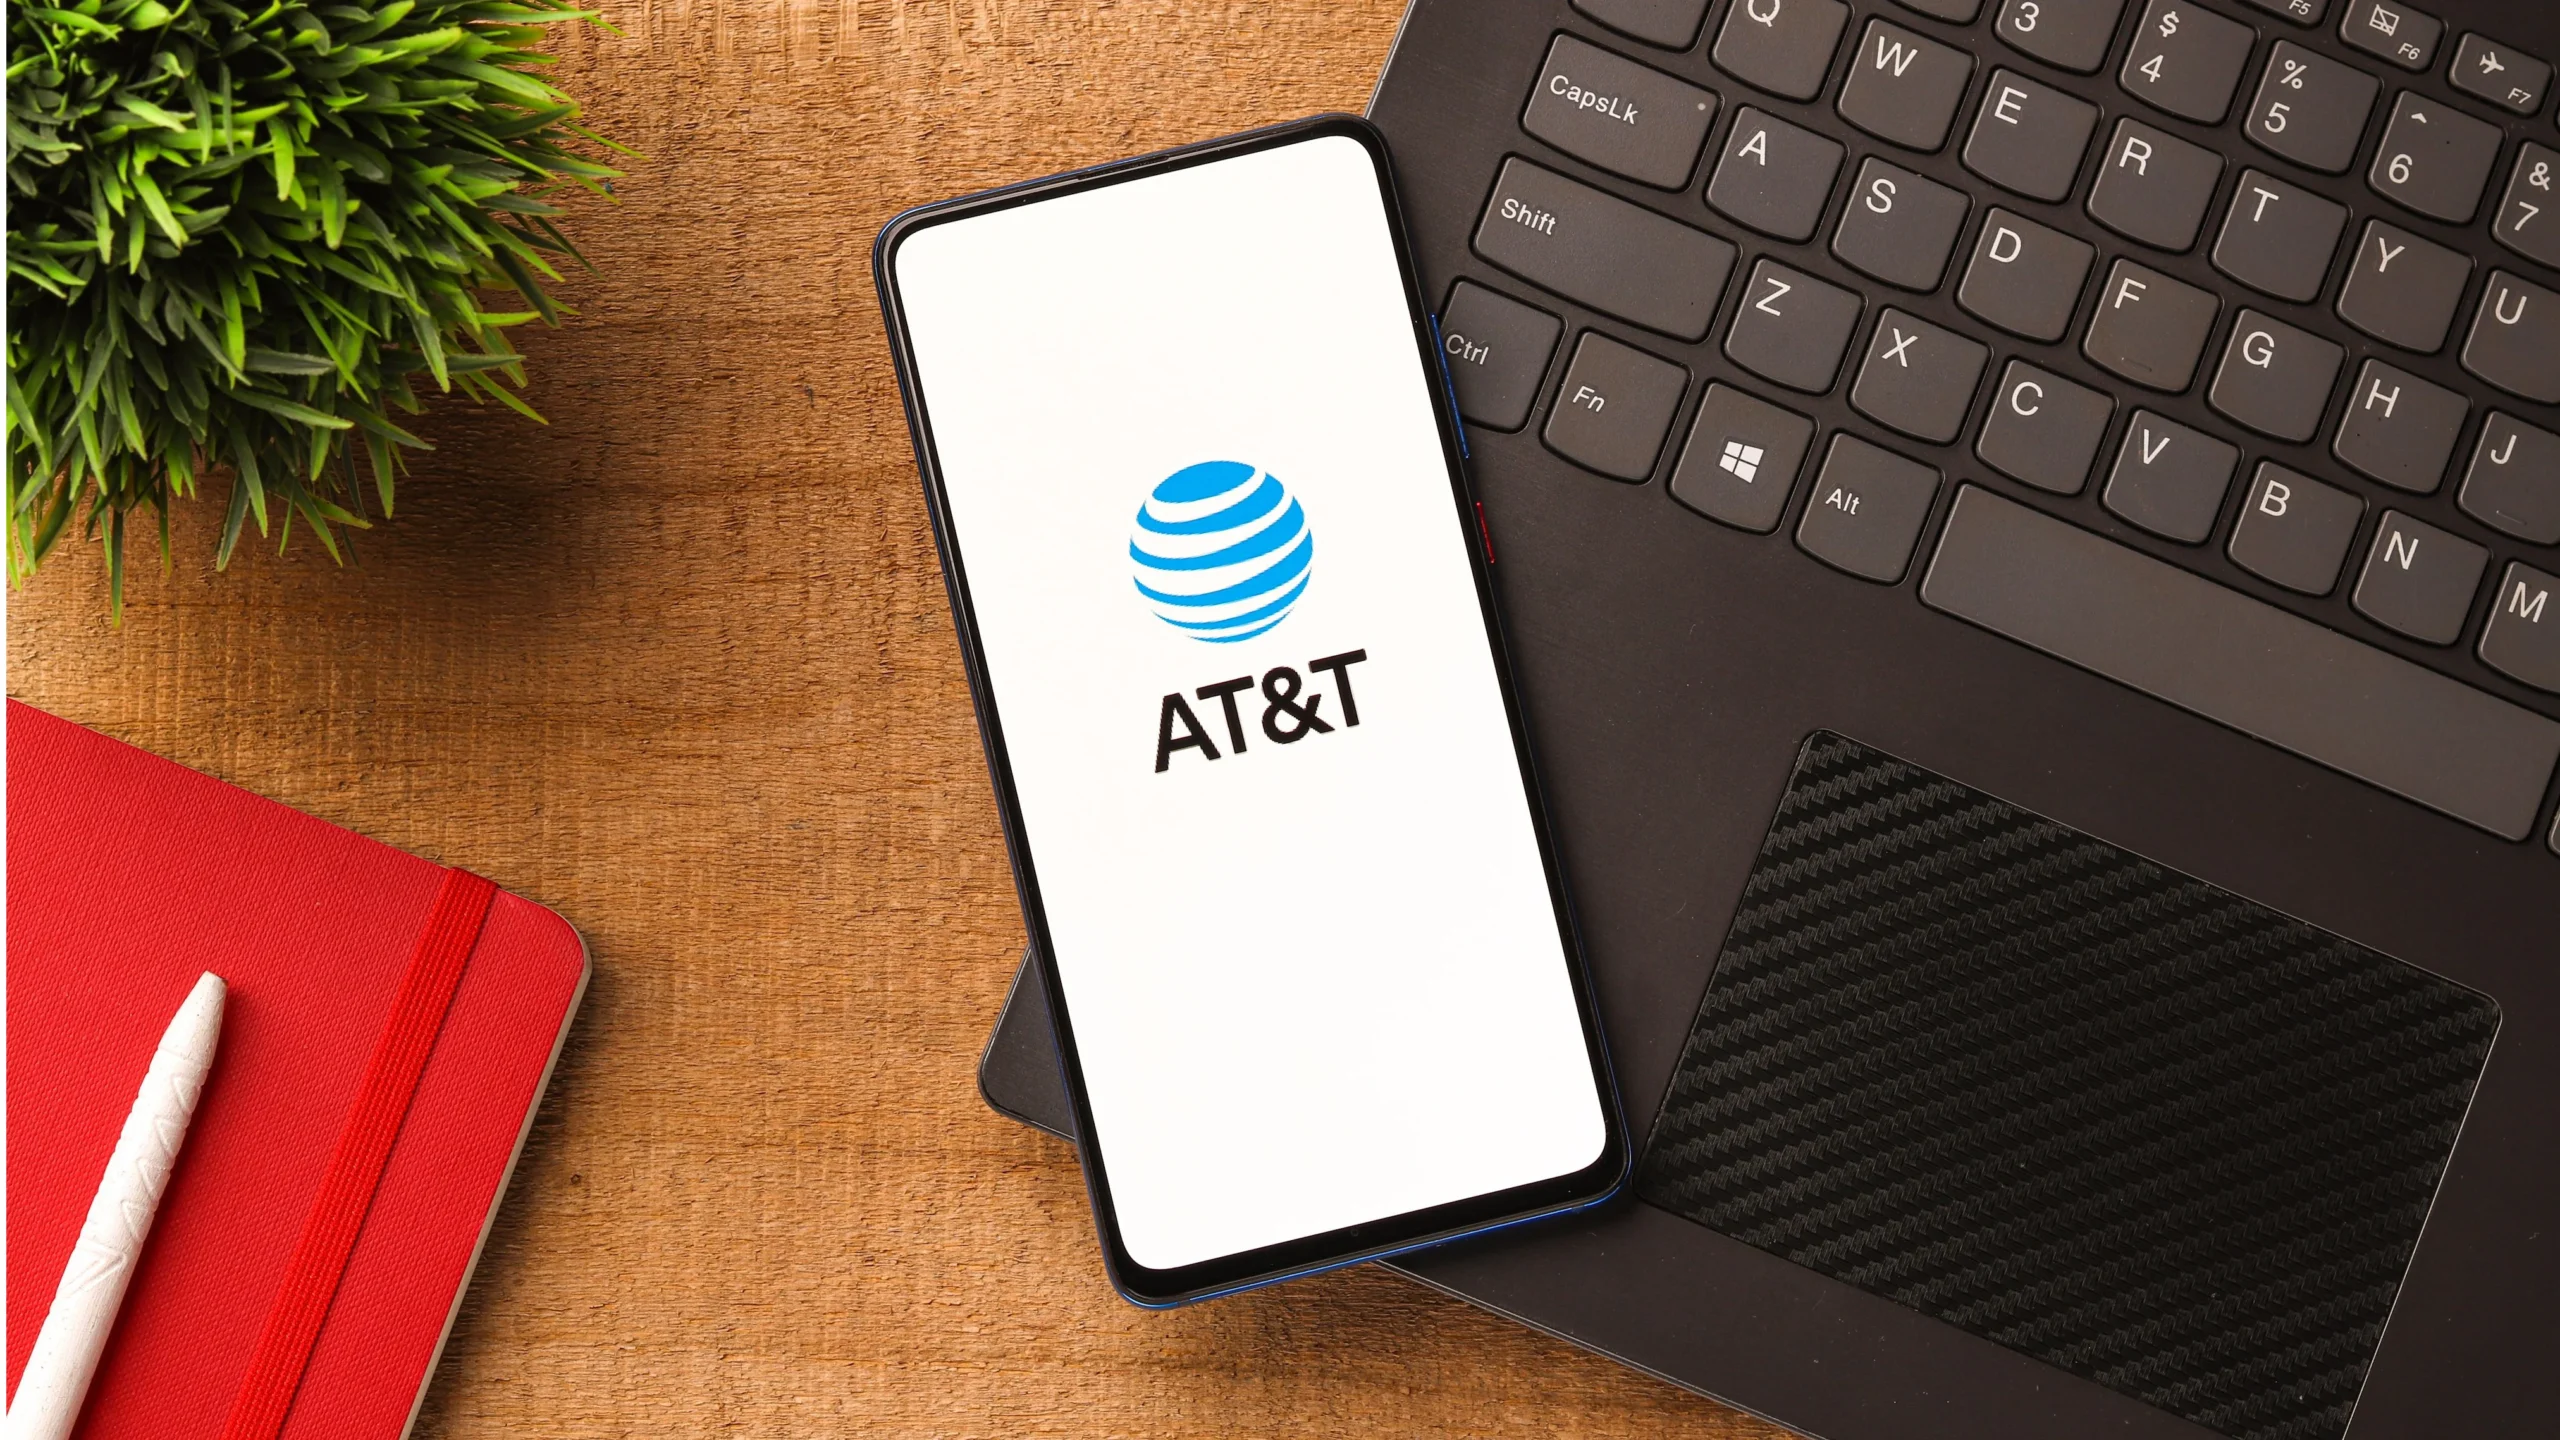 Outrage Over AT&T's Tiny $5 Offer: Is This Fair for Hours Without Service?